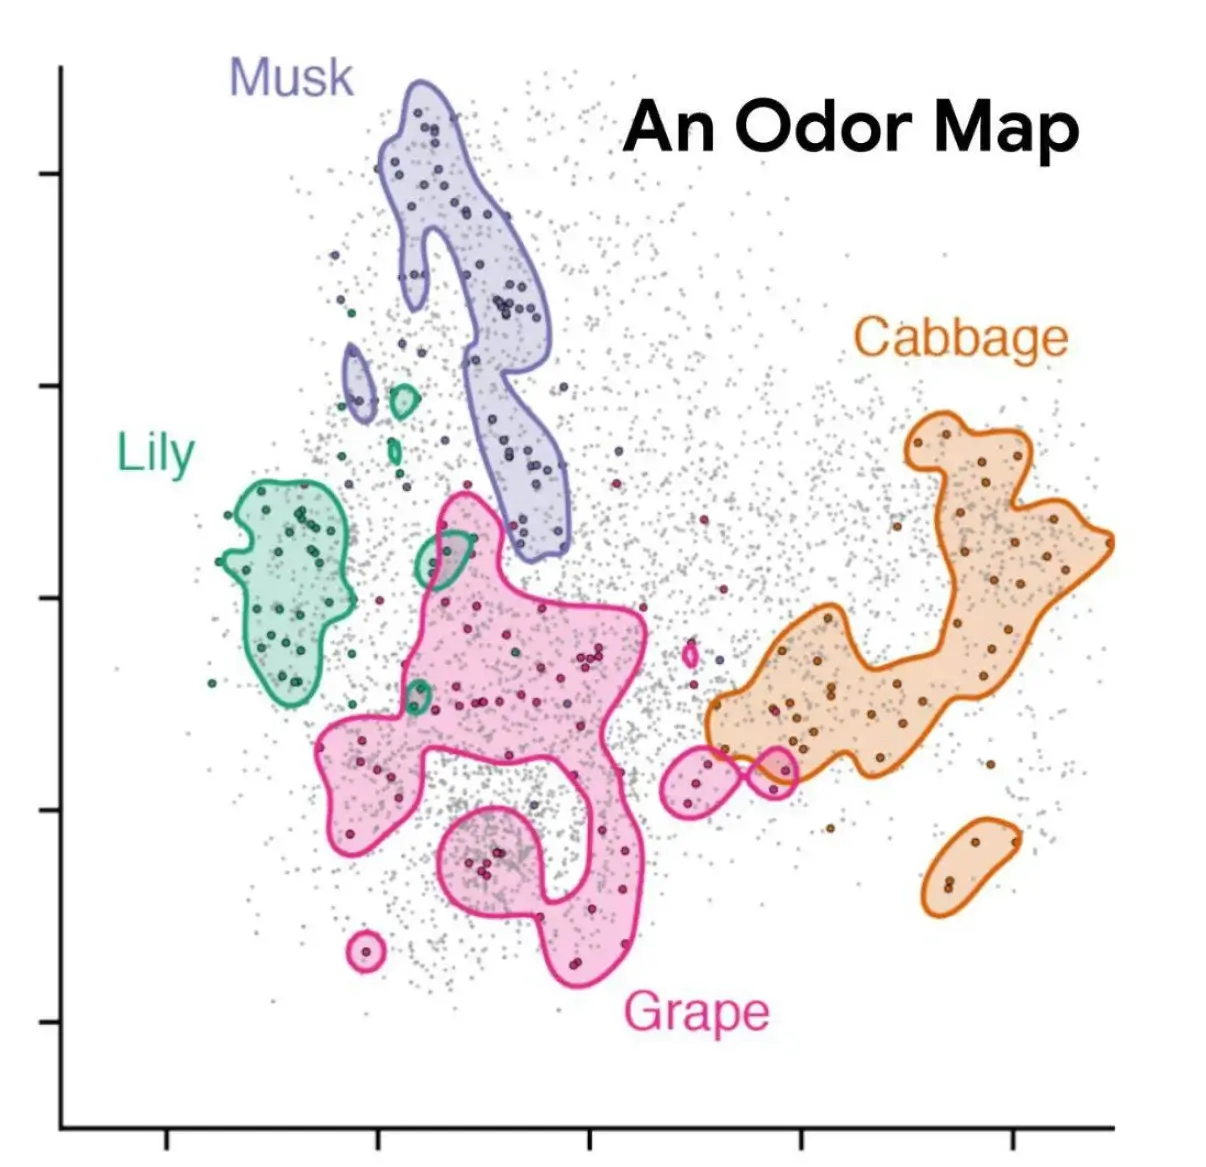 “An Odor Map” scatter plot with unlabeled axes. Among the hundreds of points, some discontinuous amorphous shapes are drawn: a tall narrow purple blob labeled ‘musk’ in the upper left quadrant, a wider and shorter green ‘Lily’ in the center left, a large bulbous red hook in the bottom left labeled ‘Grape’, and an orange squashed U in the center right as ‘Cabbage’.